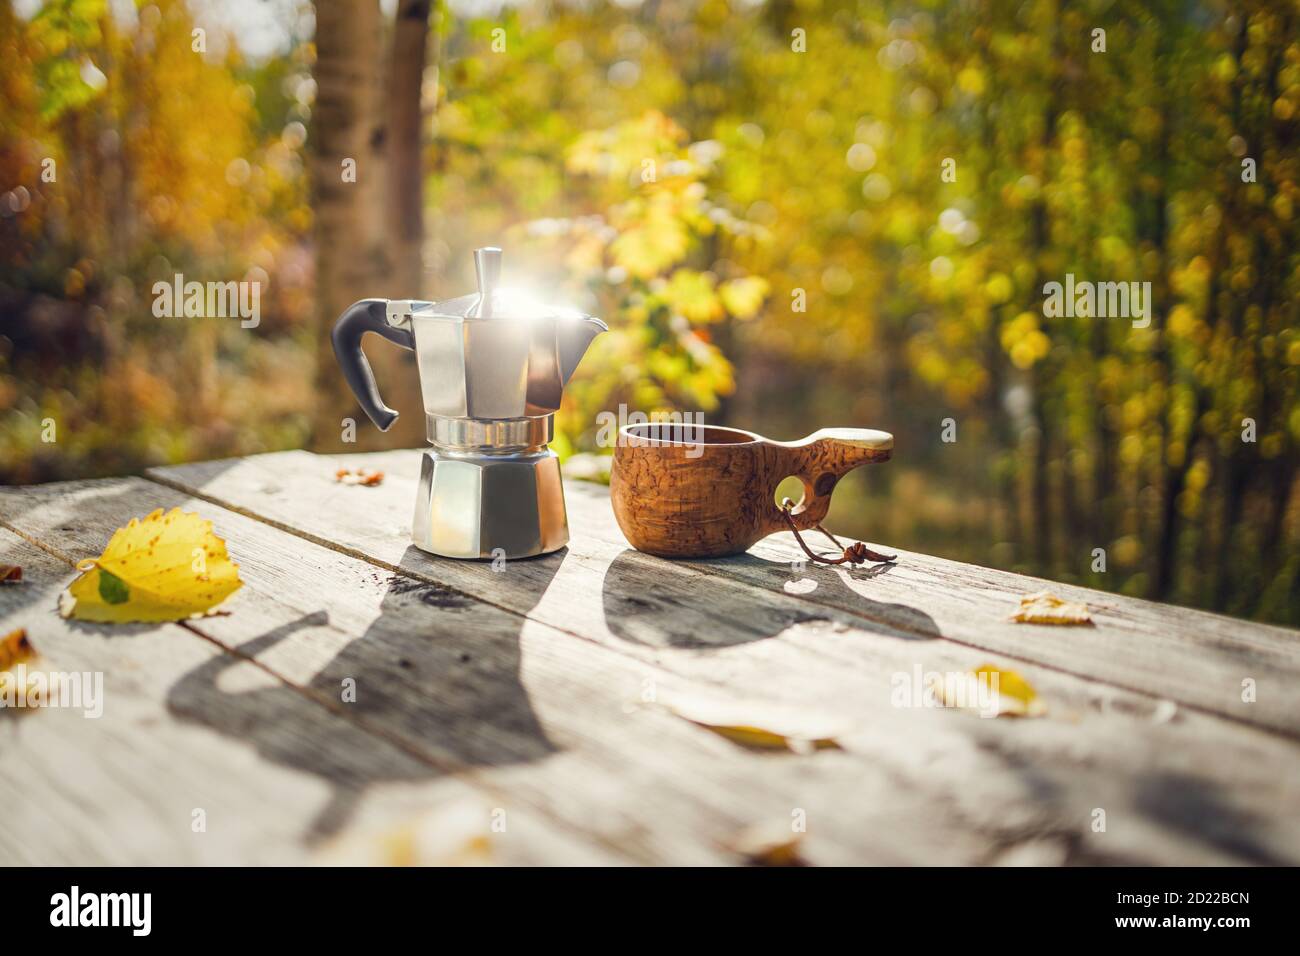 Hot Water Boiler Pot On Wood Stove With Coffee Filter Stock Photo -  Download Image Now - iStock